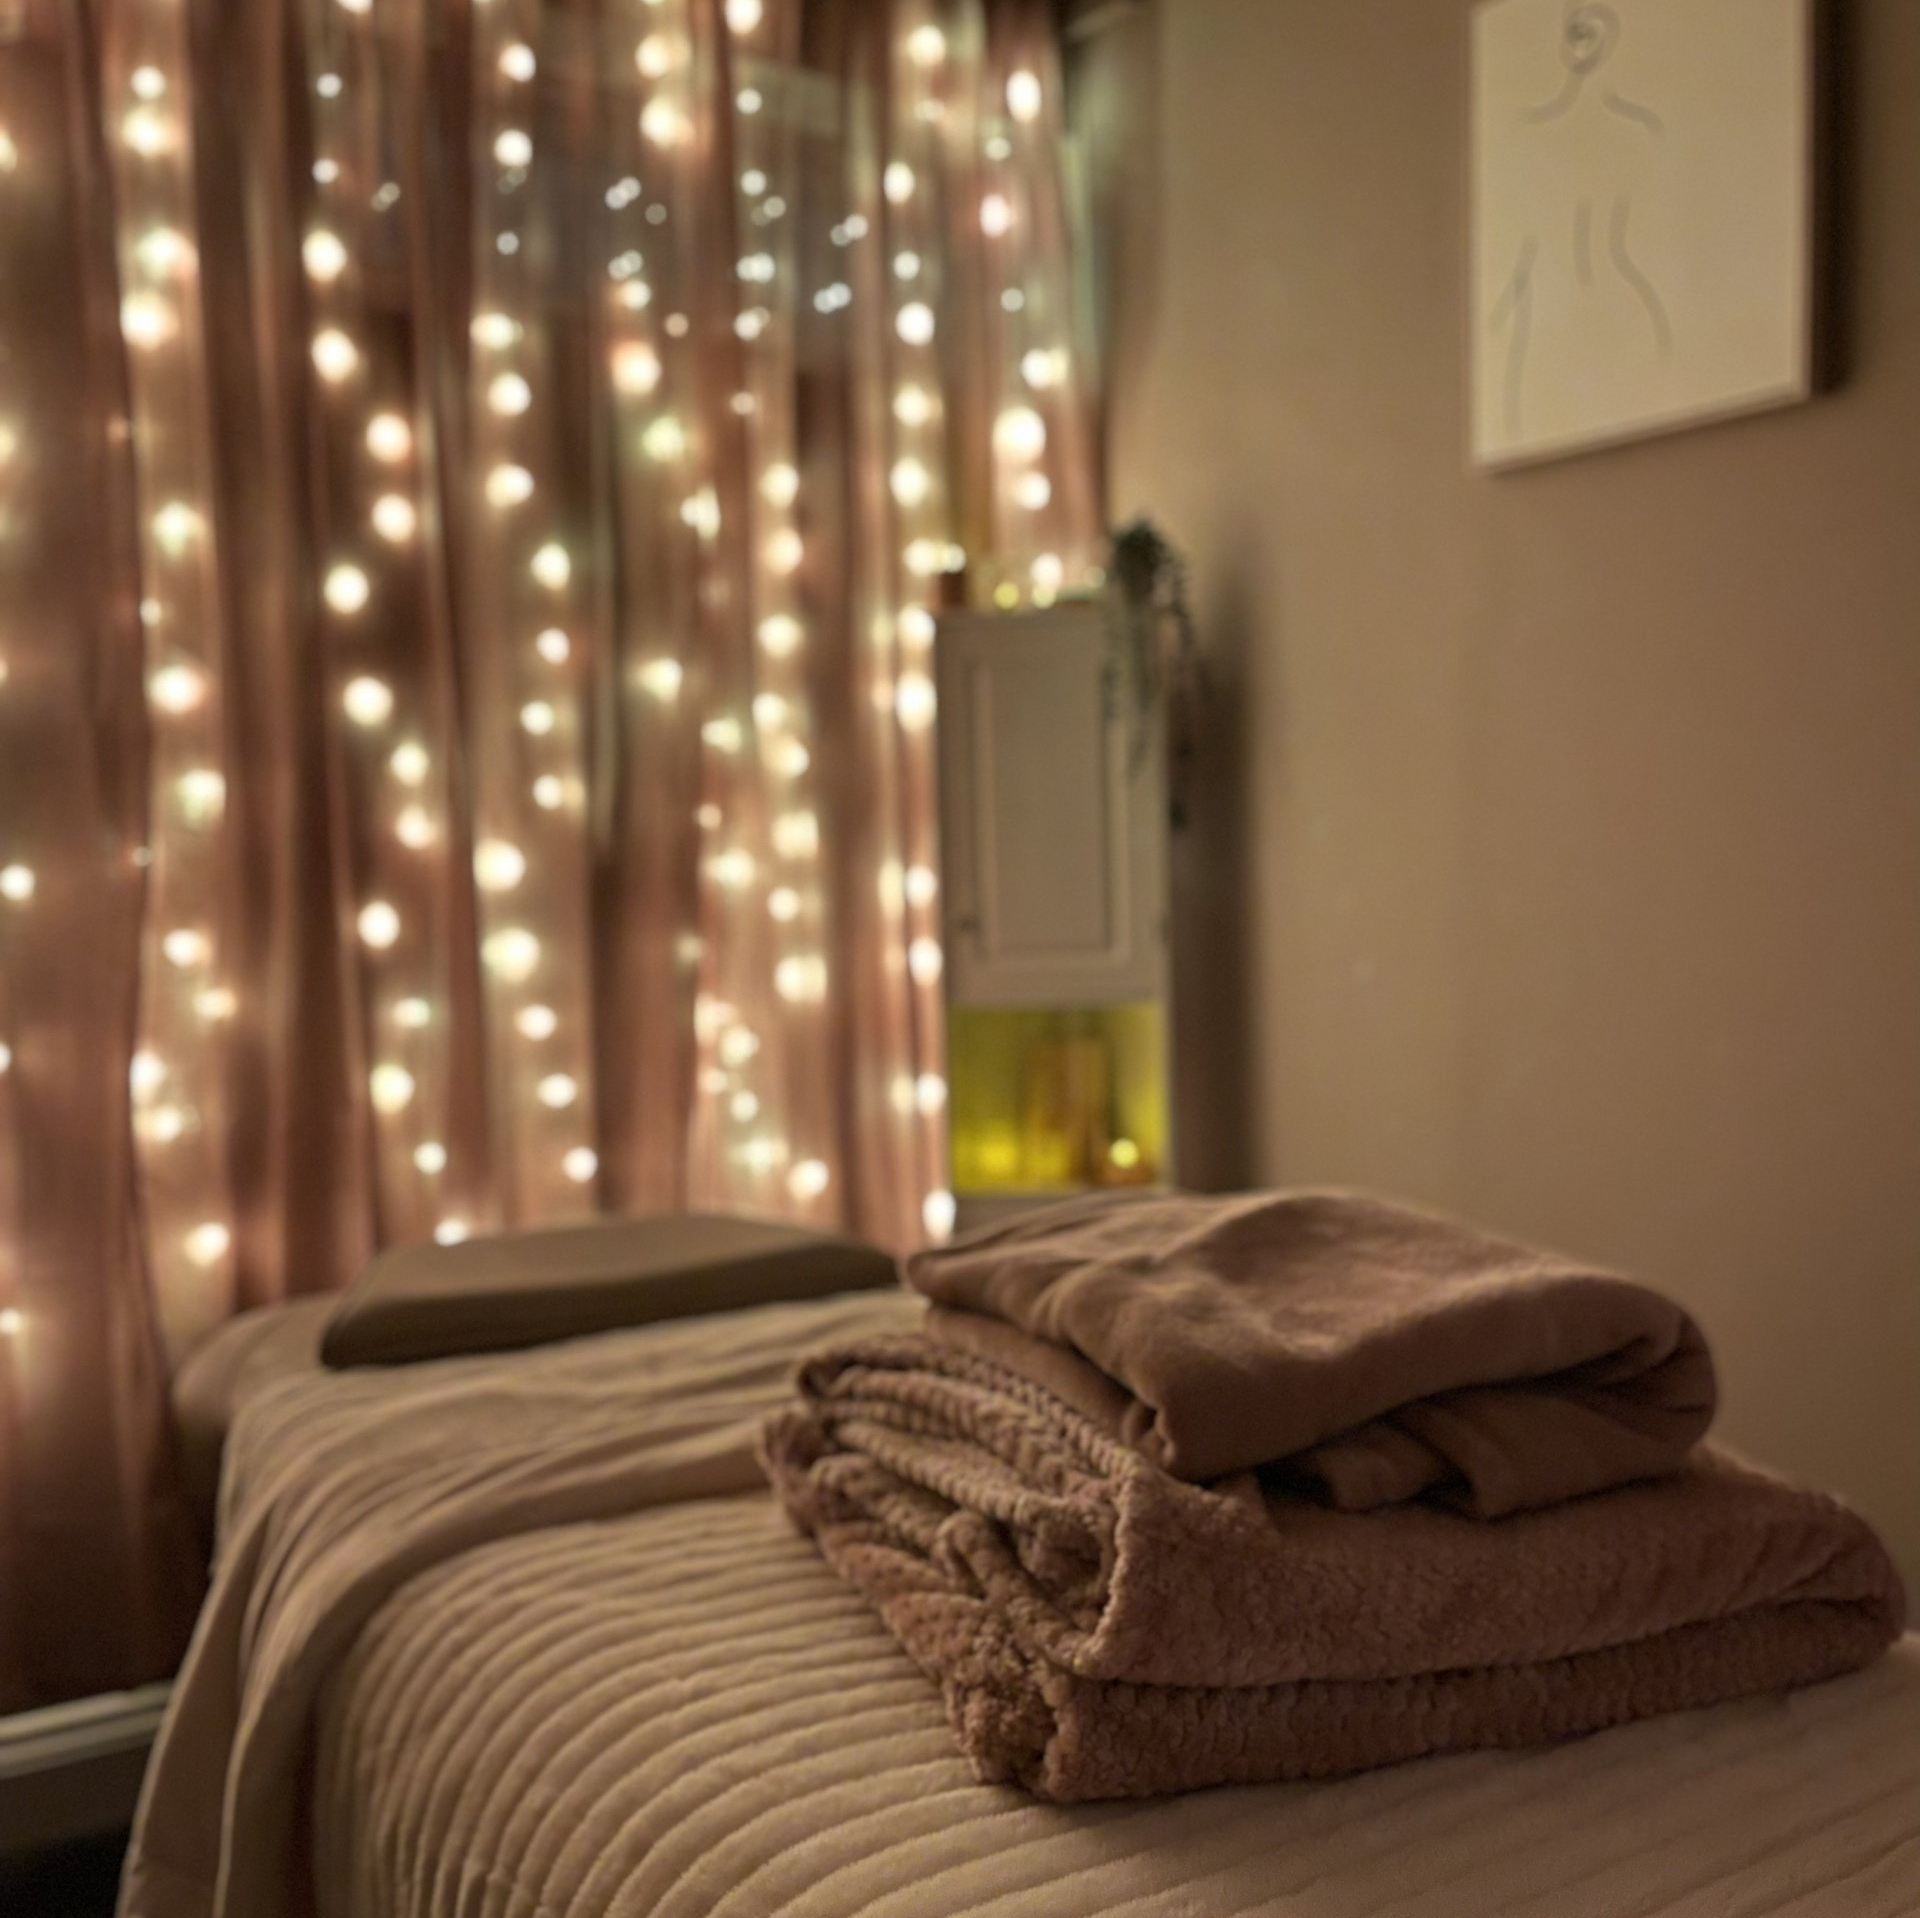 A treatment bed with towels and fairy lights